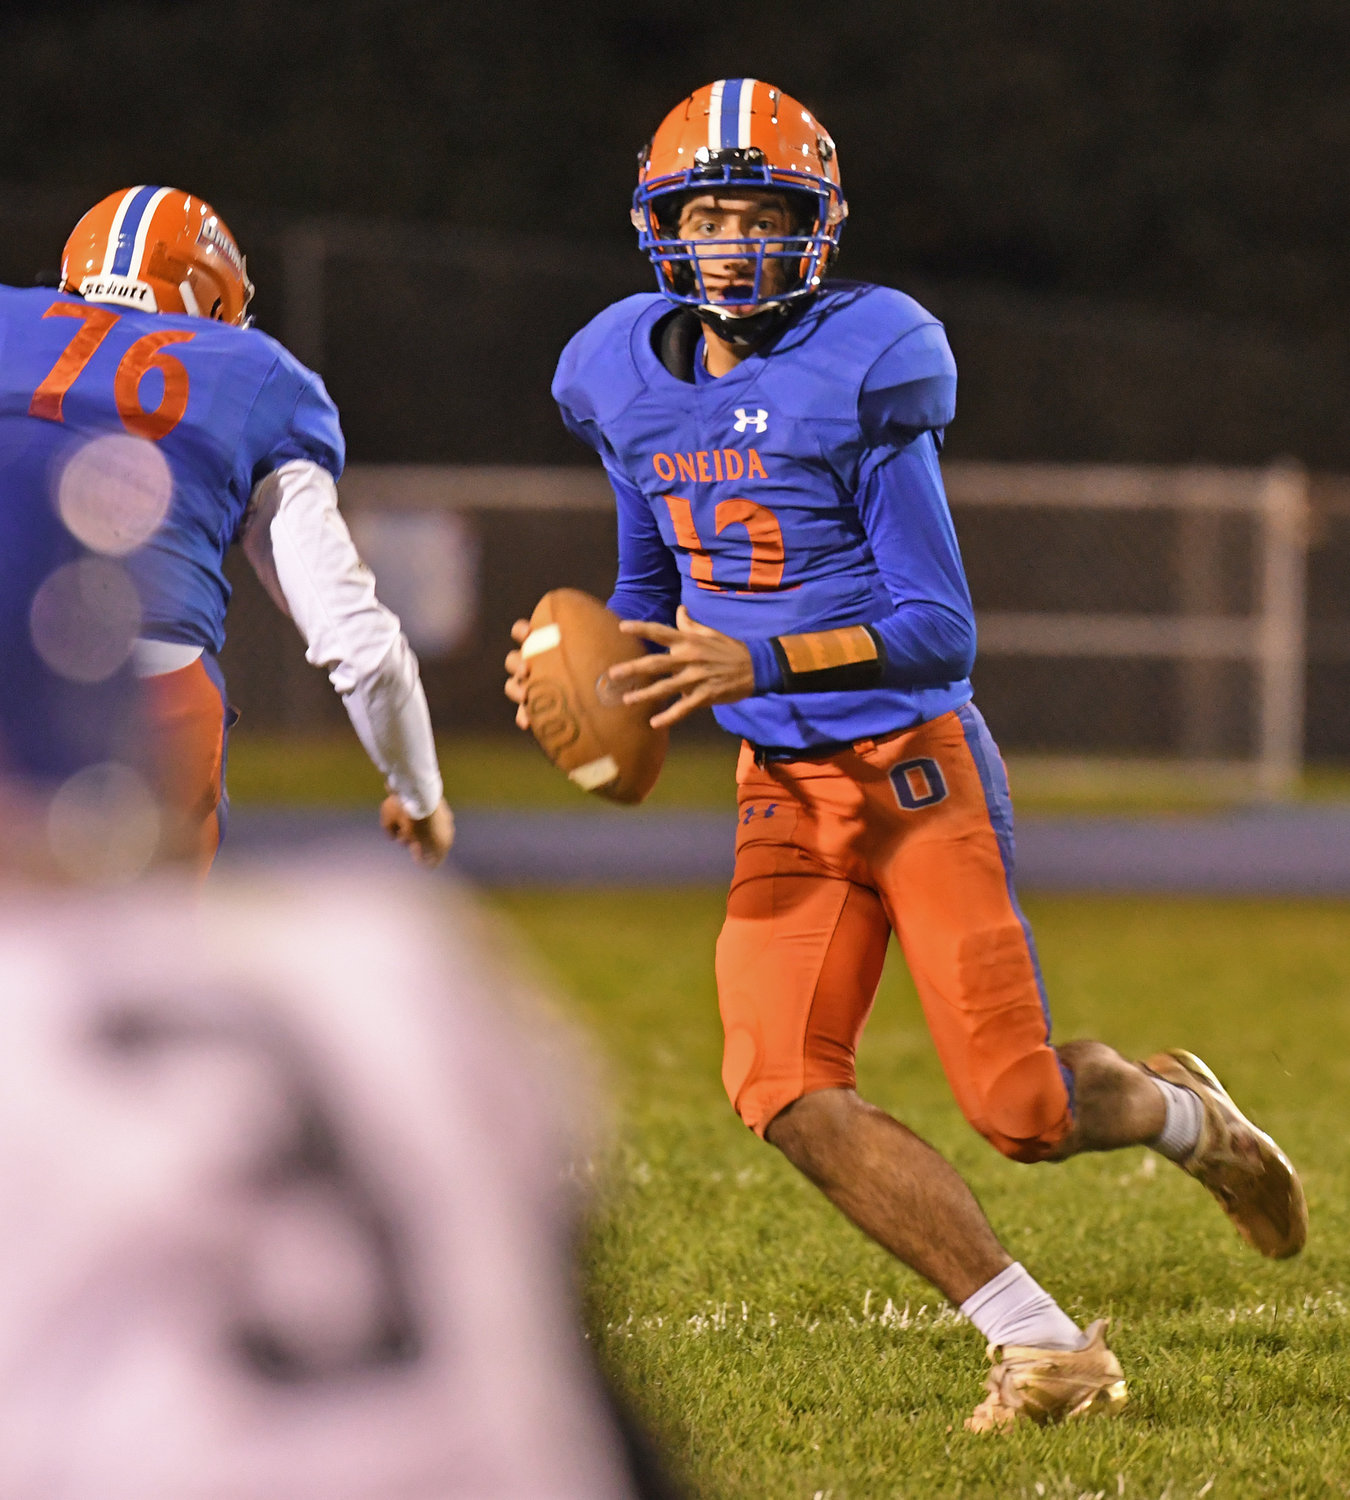 Oneida's Thomas Lacy looks down field in the first half against Camden Friday night at Oneida. Lacy recently moved into the quarterback position for Oneida.